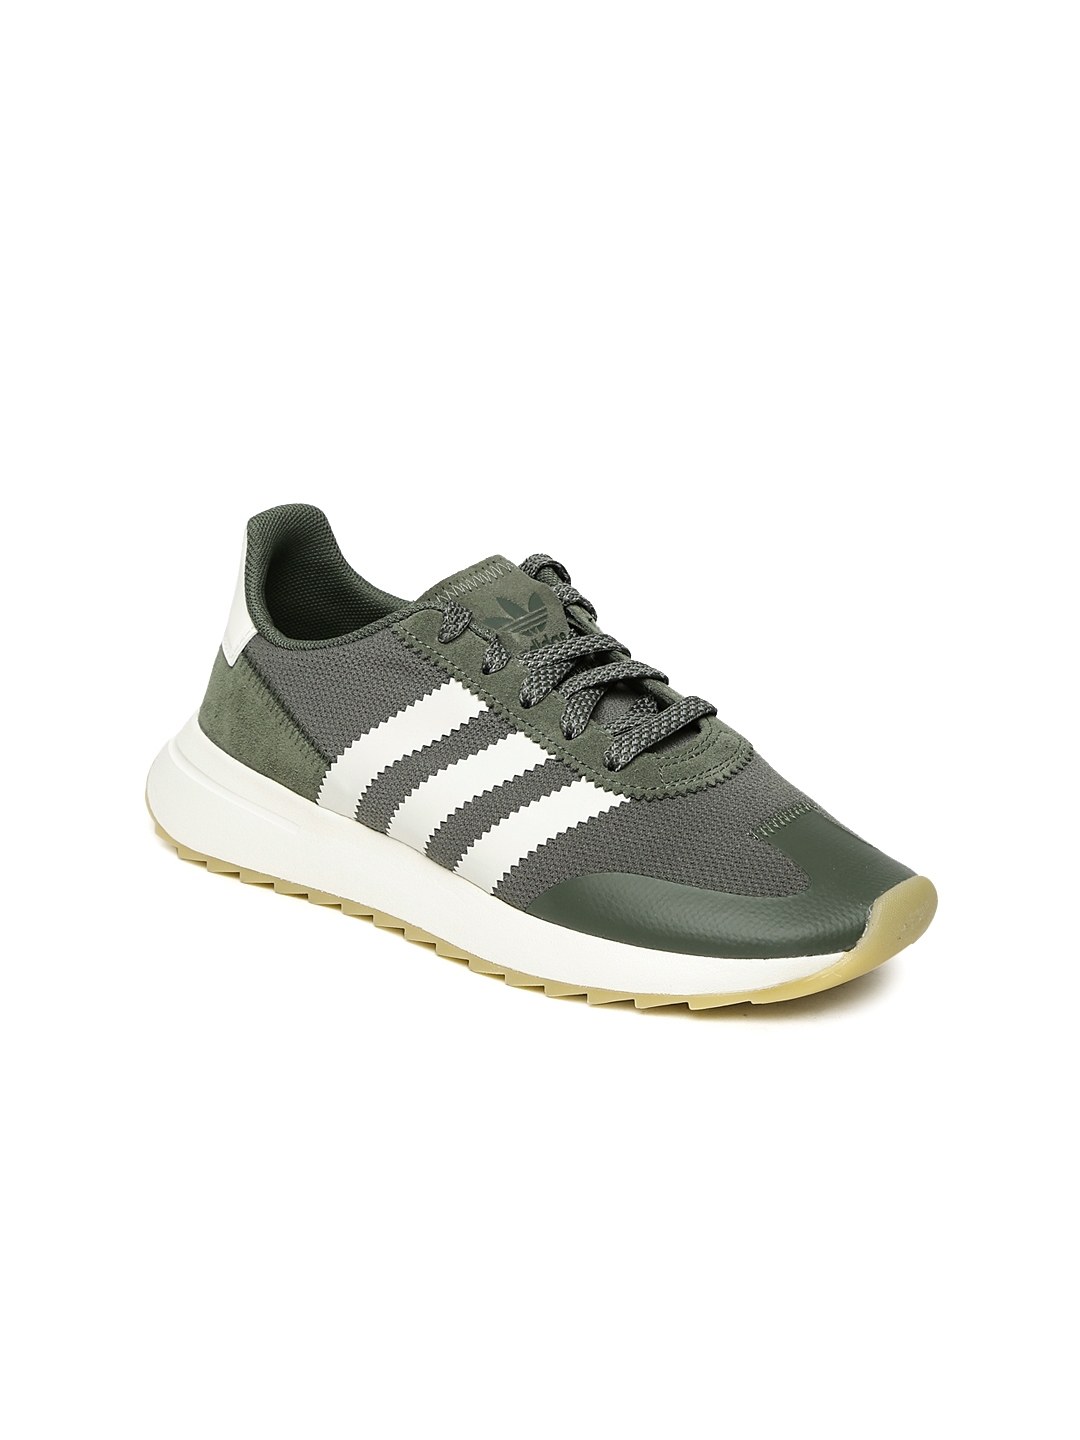 olive green adidas womens shoes